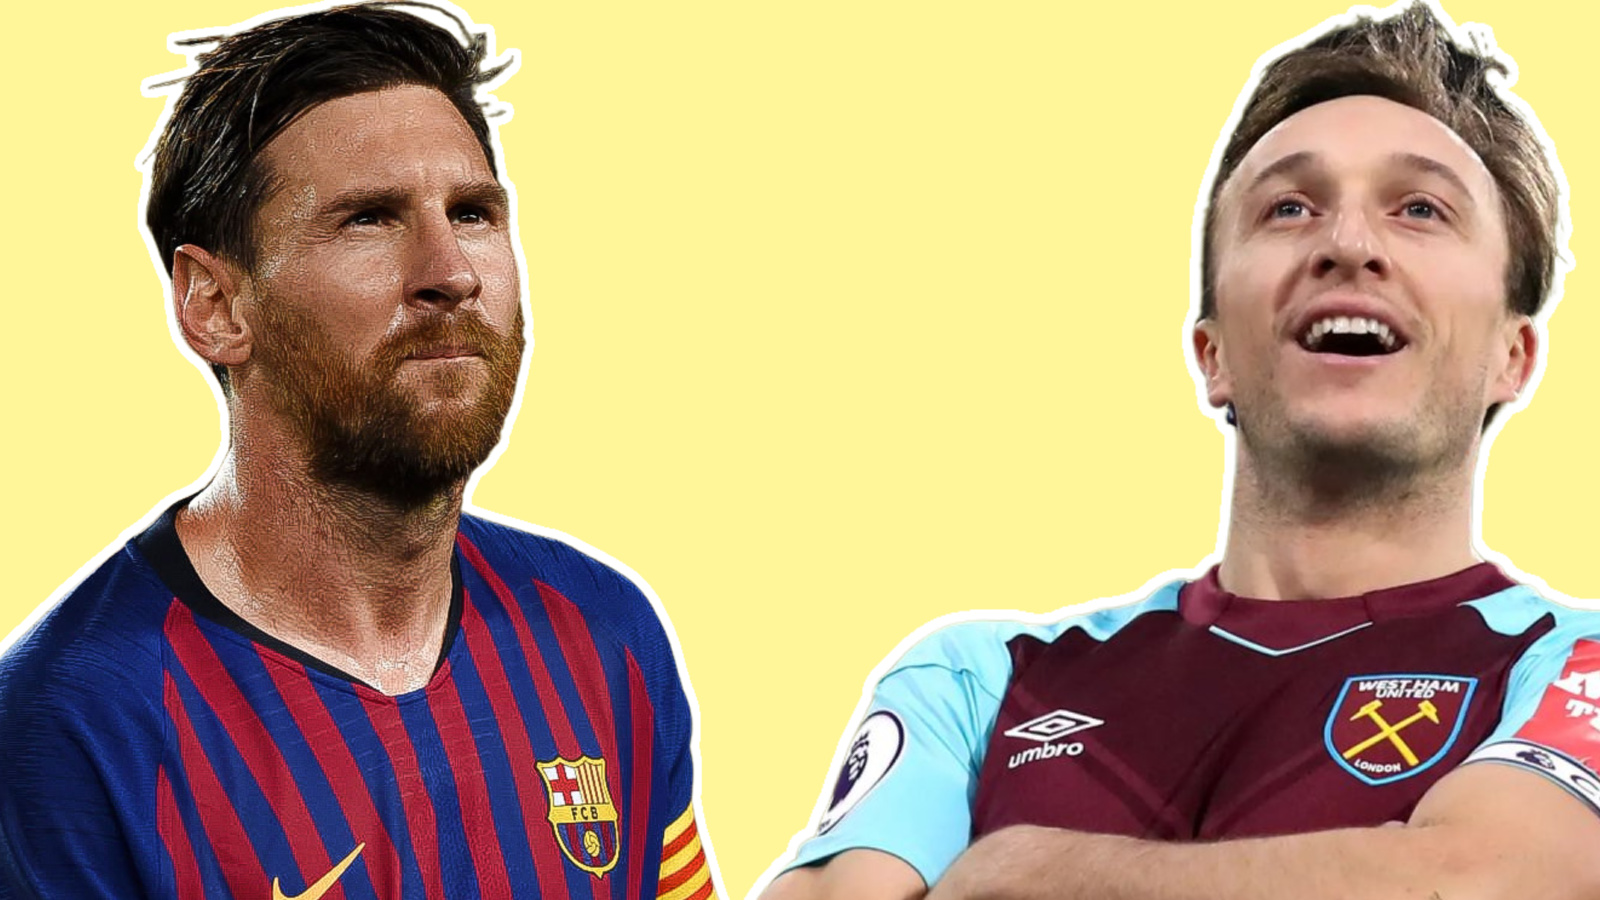 Updated list of ‘one-club men’ around Europe as Messi leaves the throne